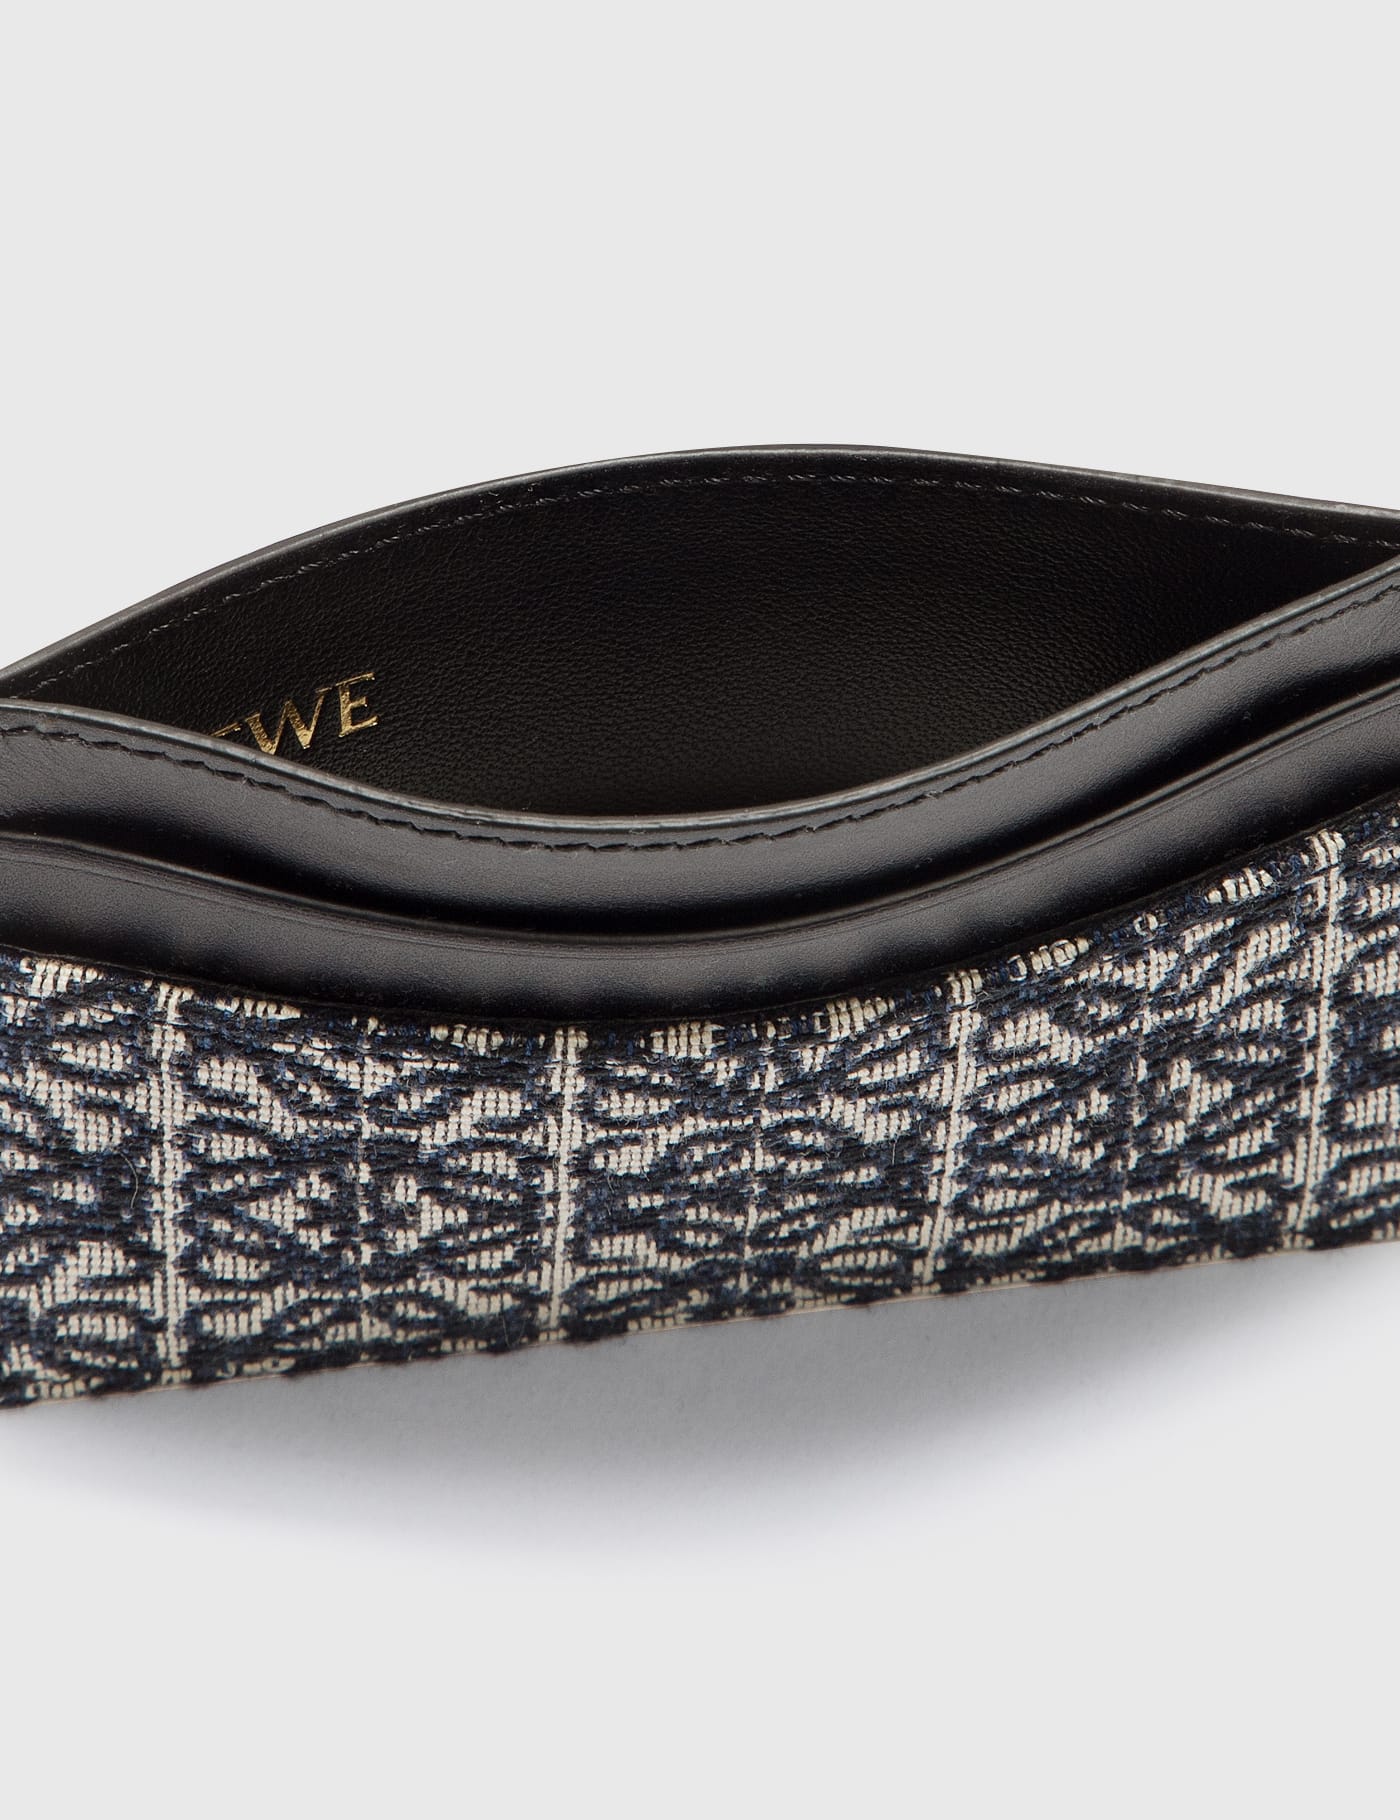 Loewe - Plain Card Holder | HBX - Globally Curated Fashion and 